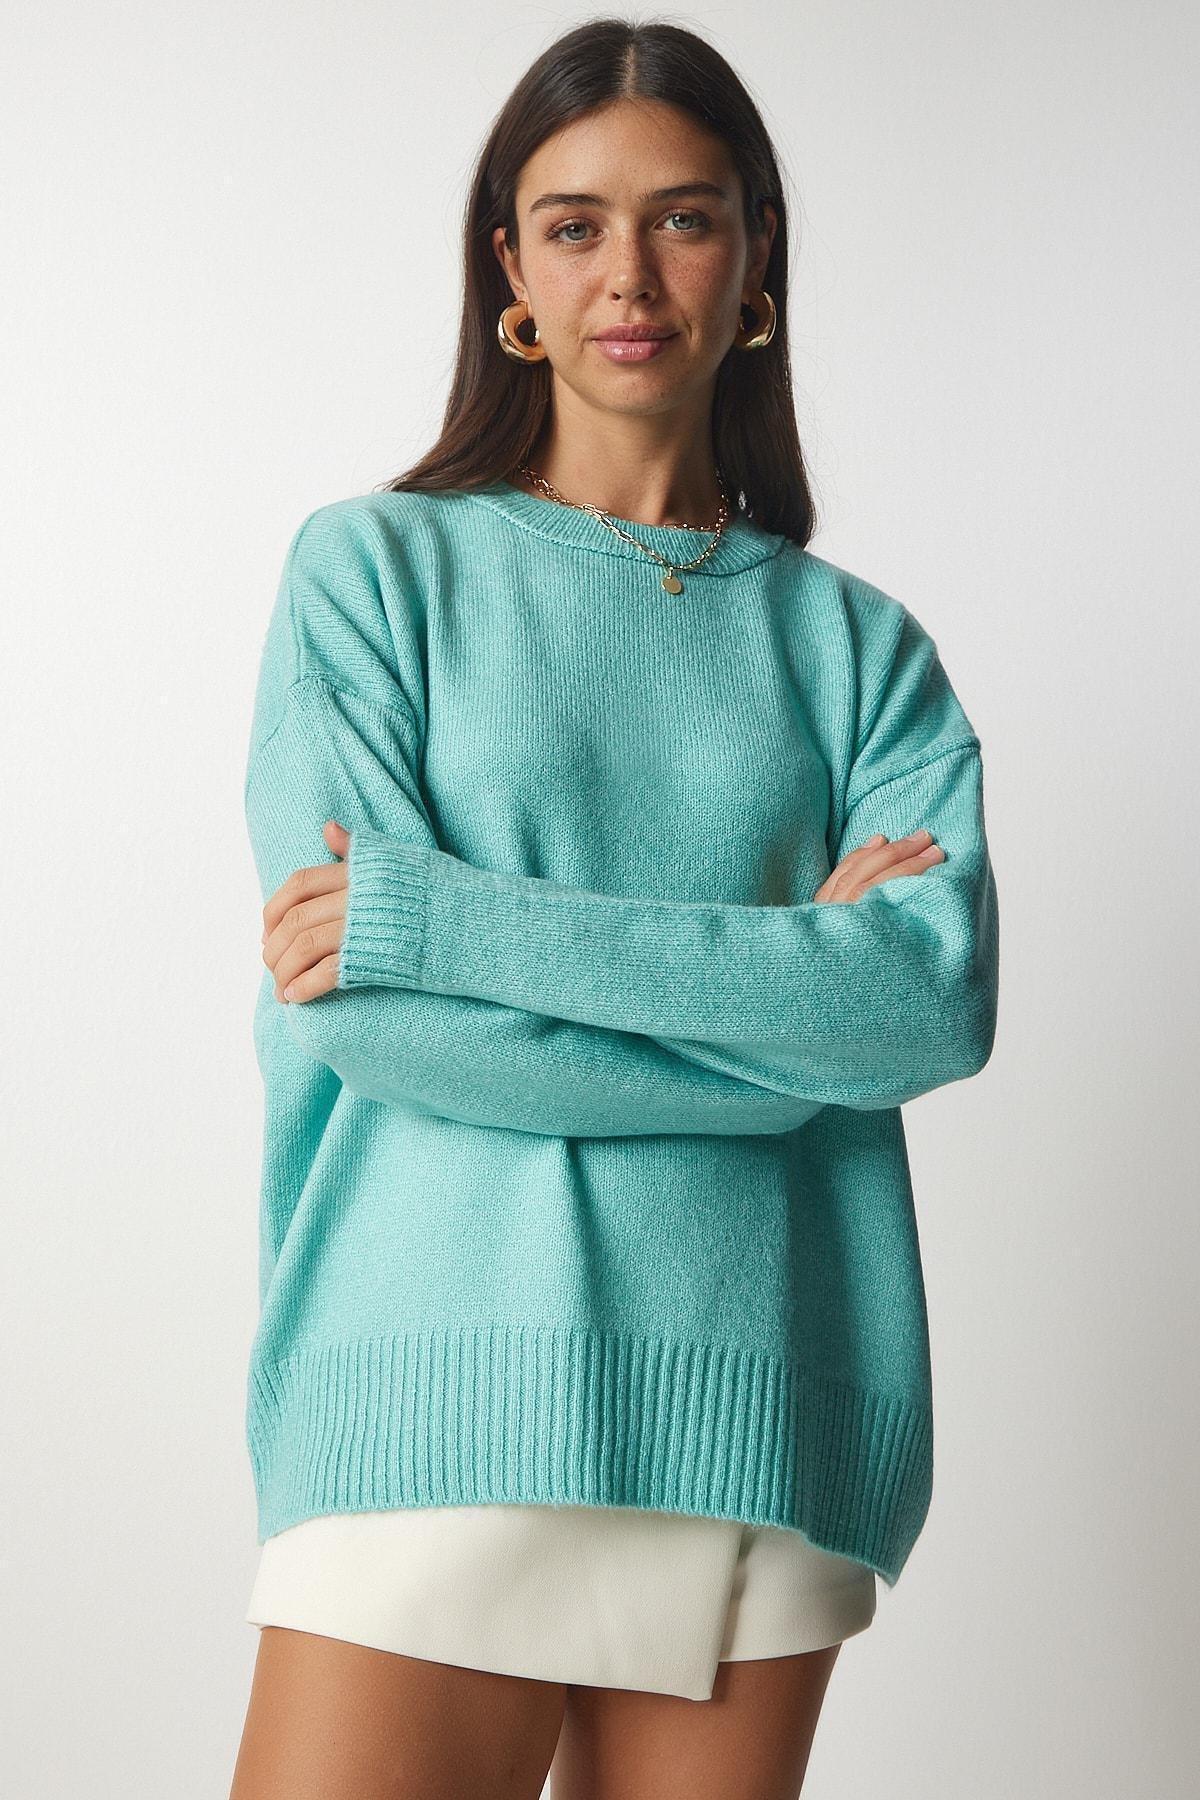 Happiness Istanbul - Green Crew Neck Oversize Knitwear Sweater